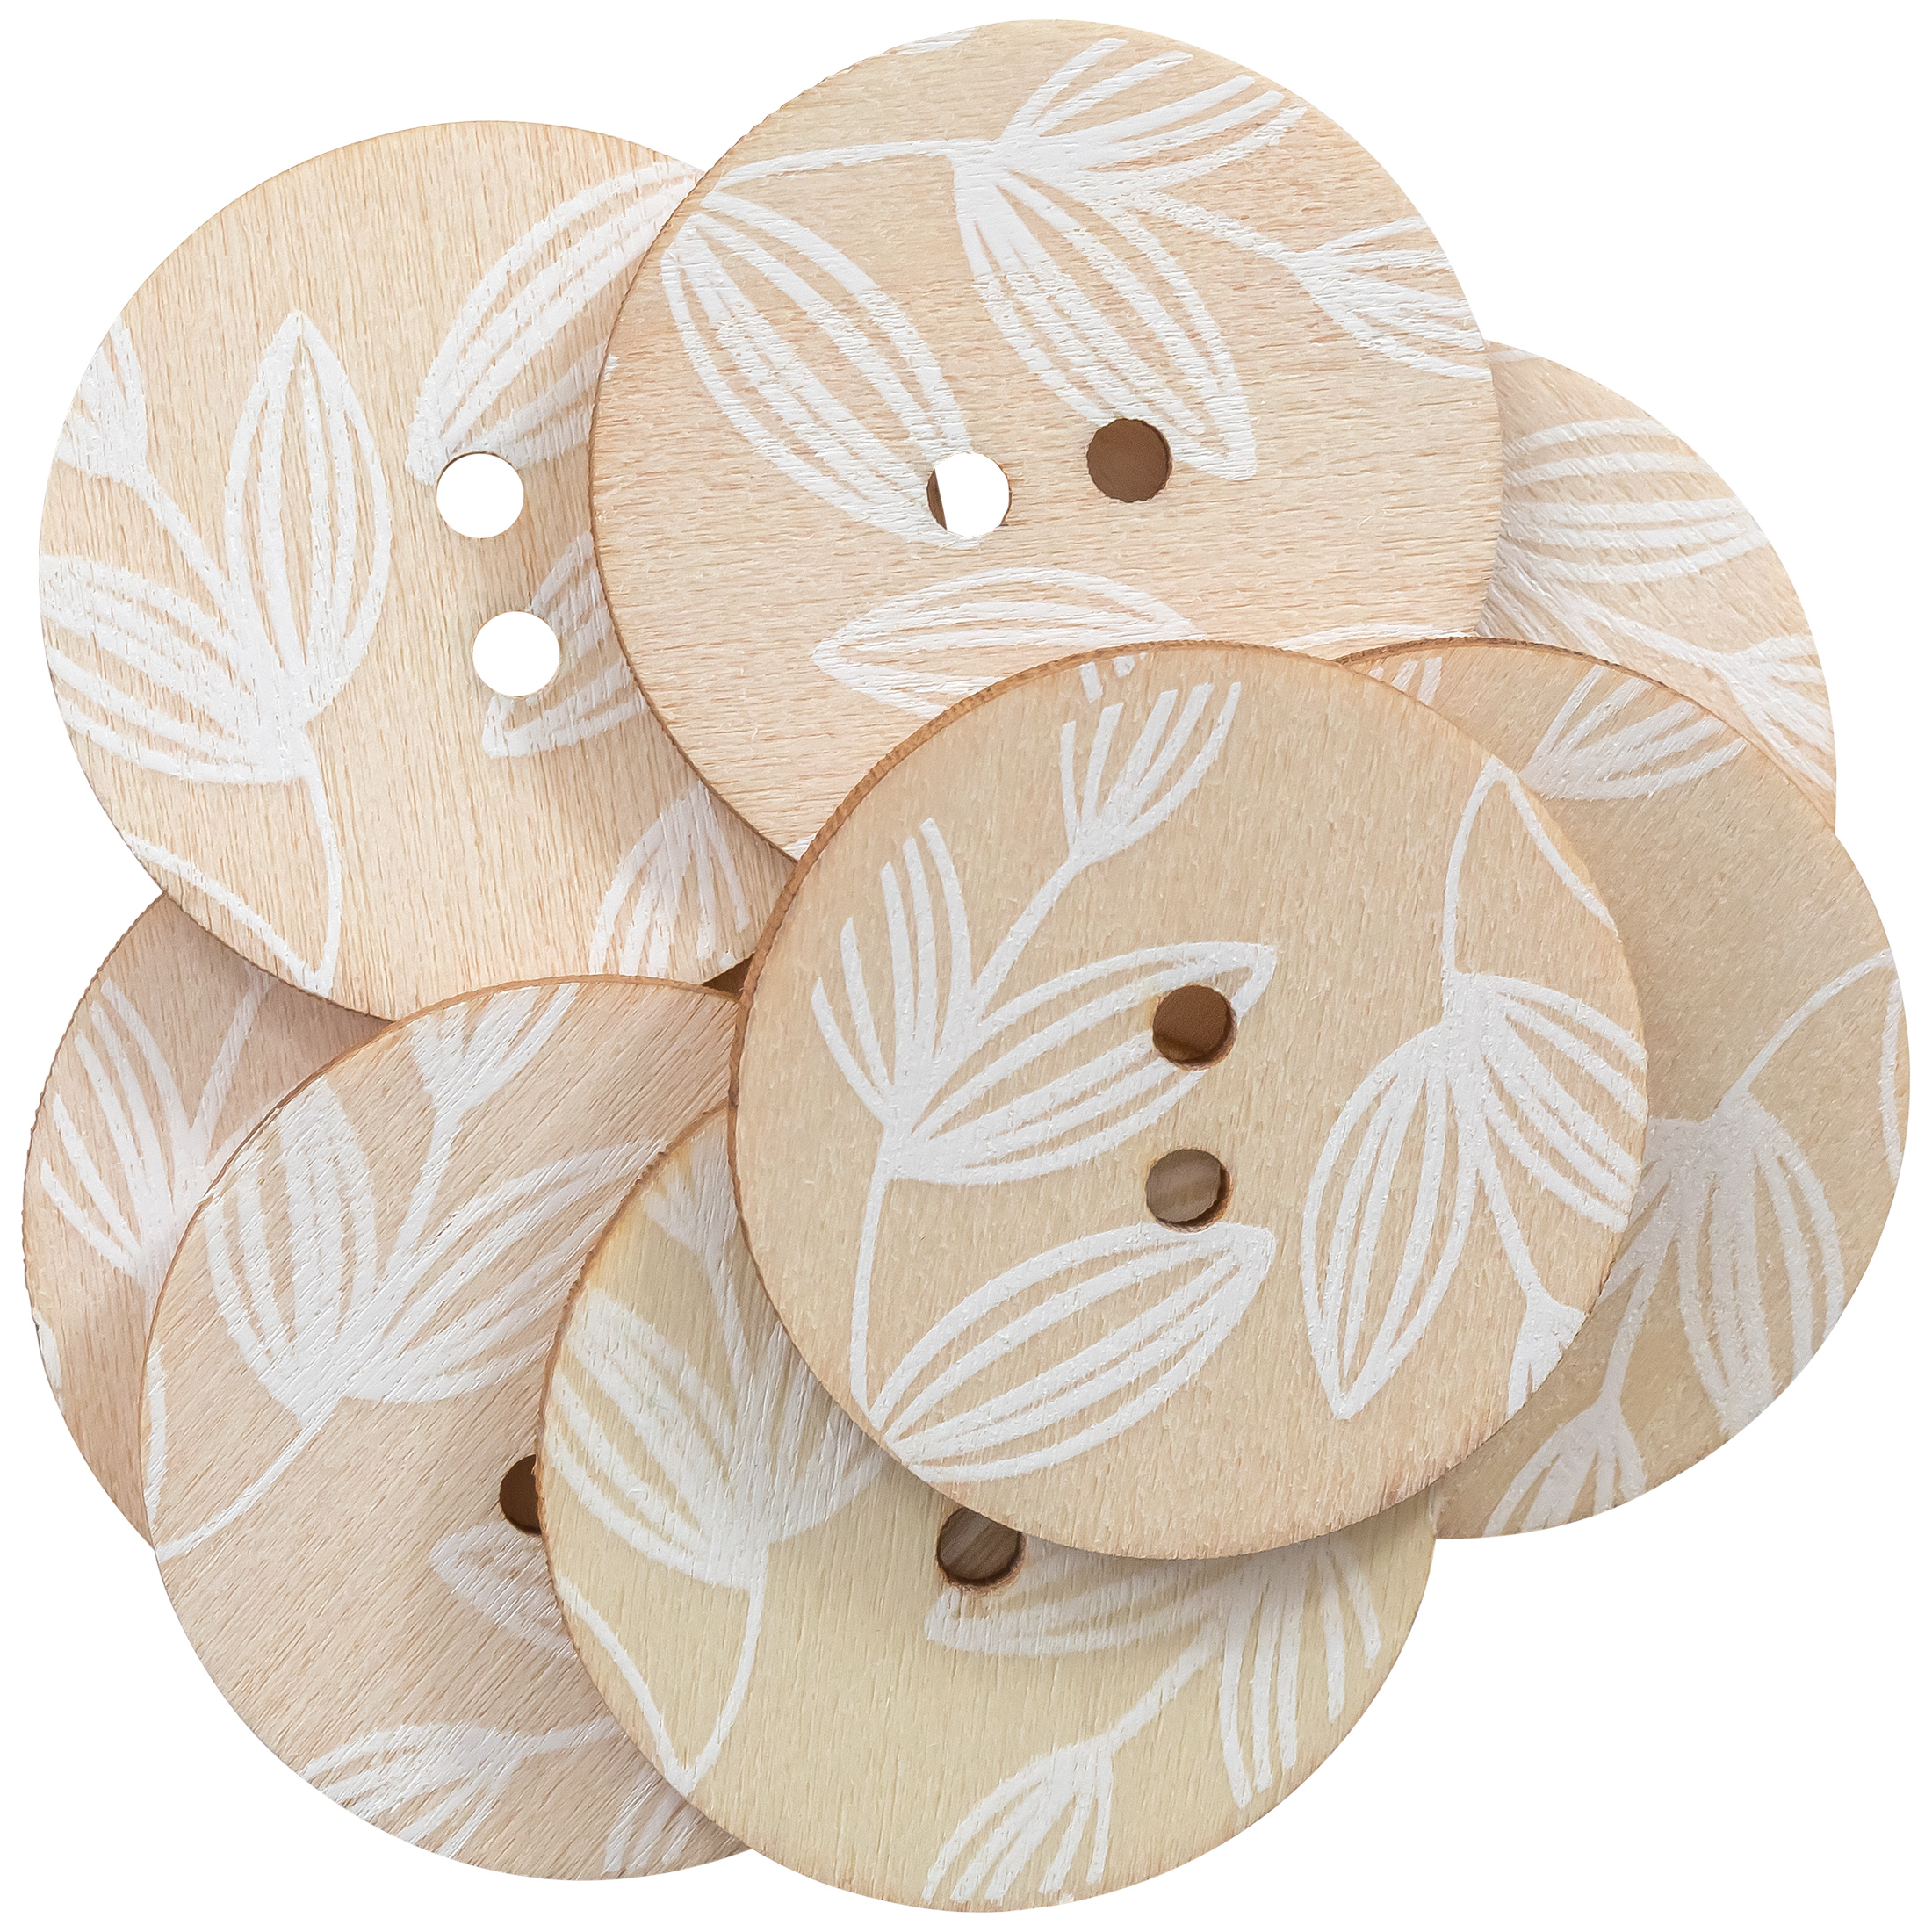 Organic Elements Tan 1 3/8" Wood Floral Printed 2-Hole Buttons, 8 Pieces - image 3 of 6